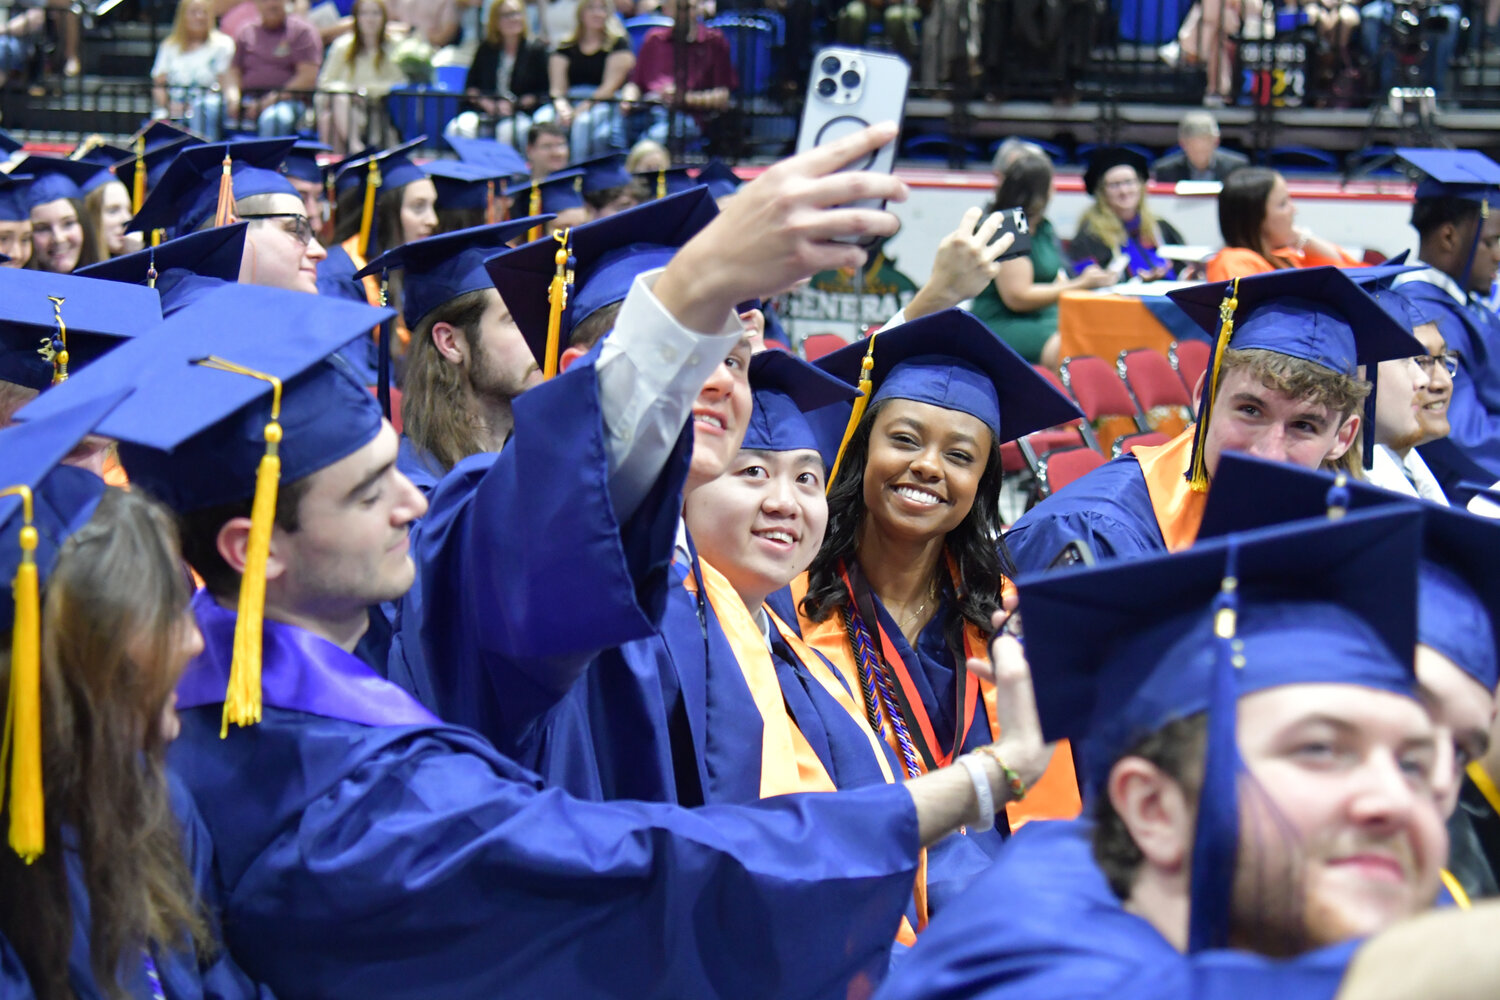 Students take the opportunity to capture selfies during Utica University's 74th undergraduate commencement ceremony.